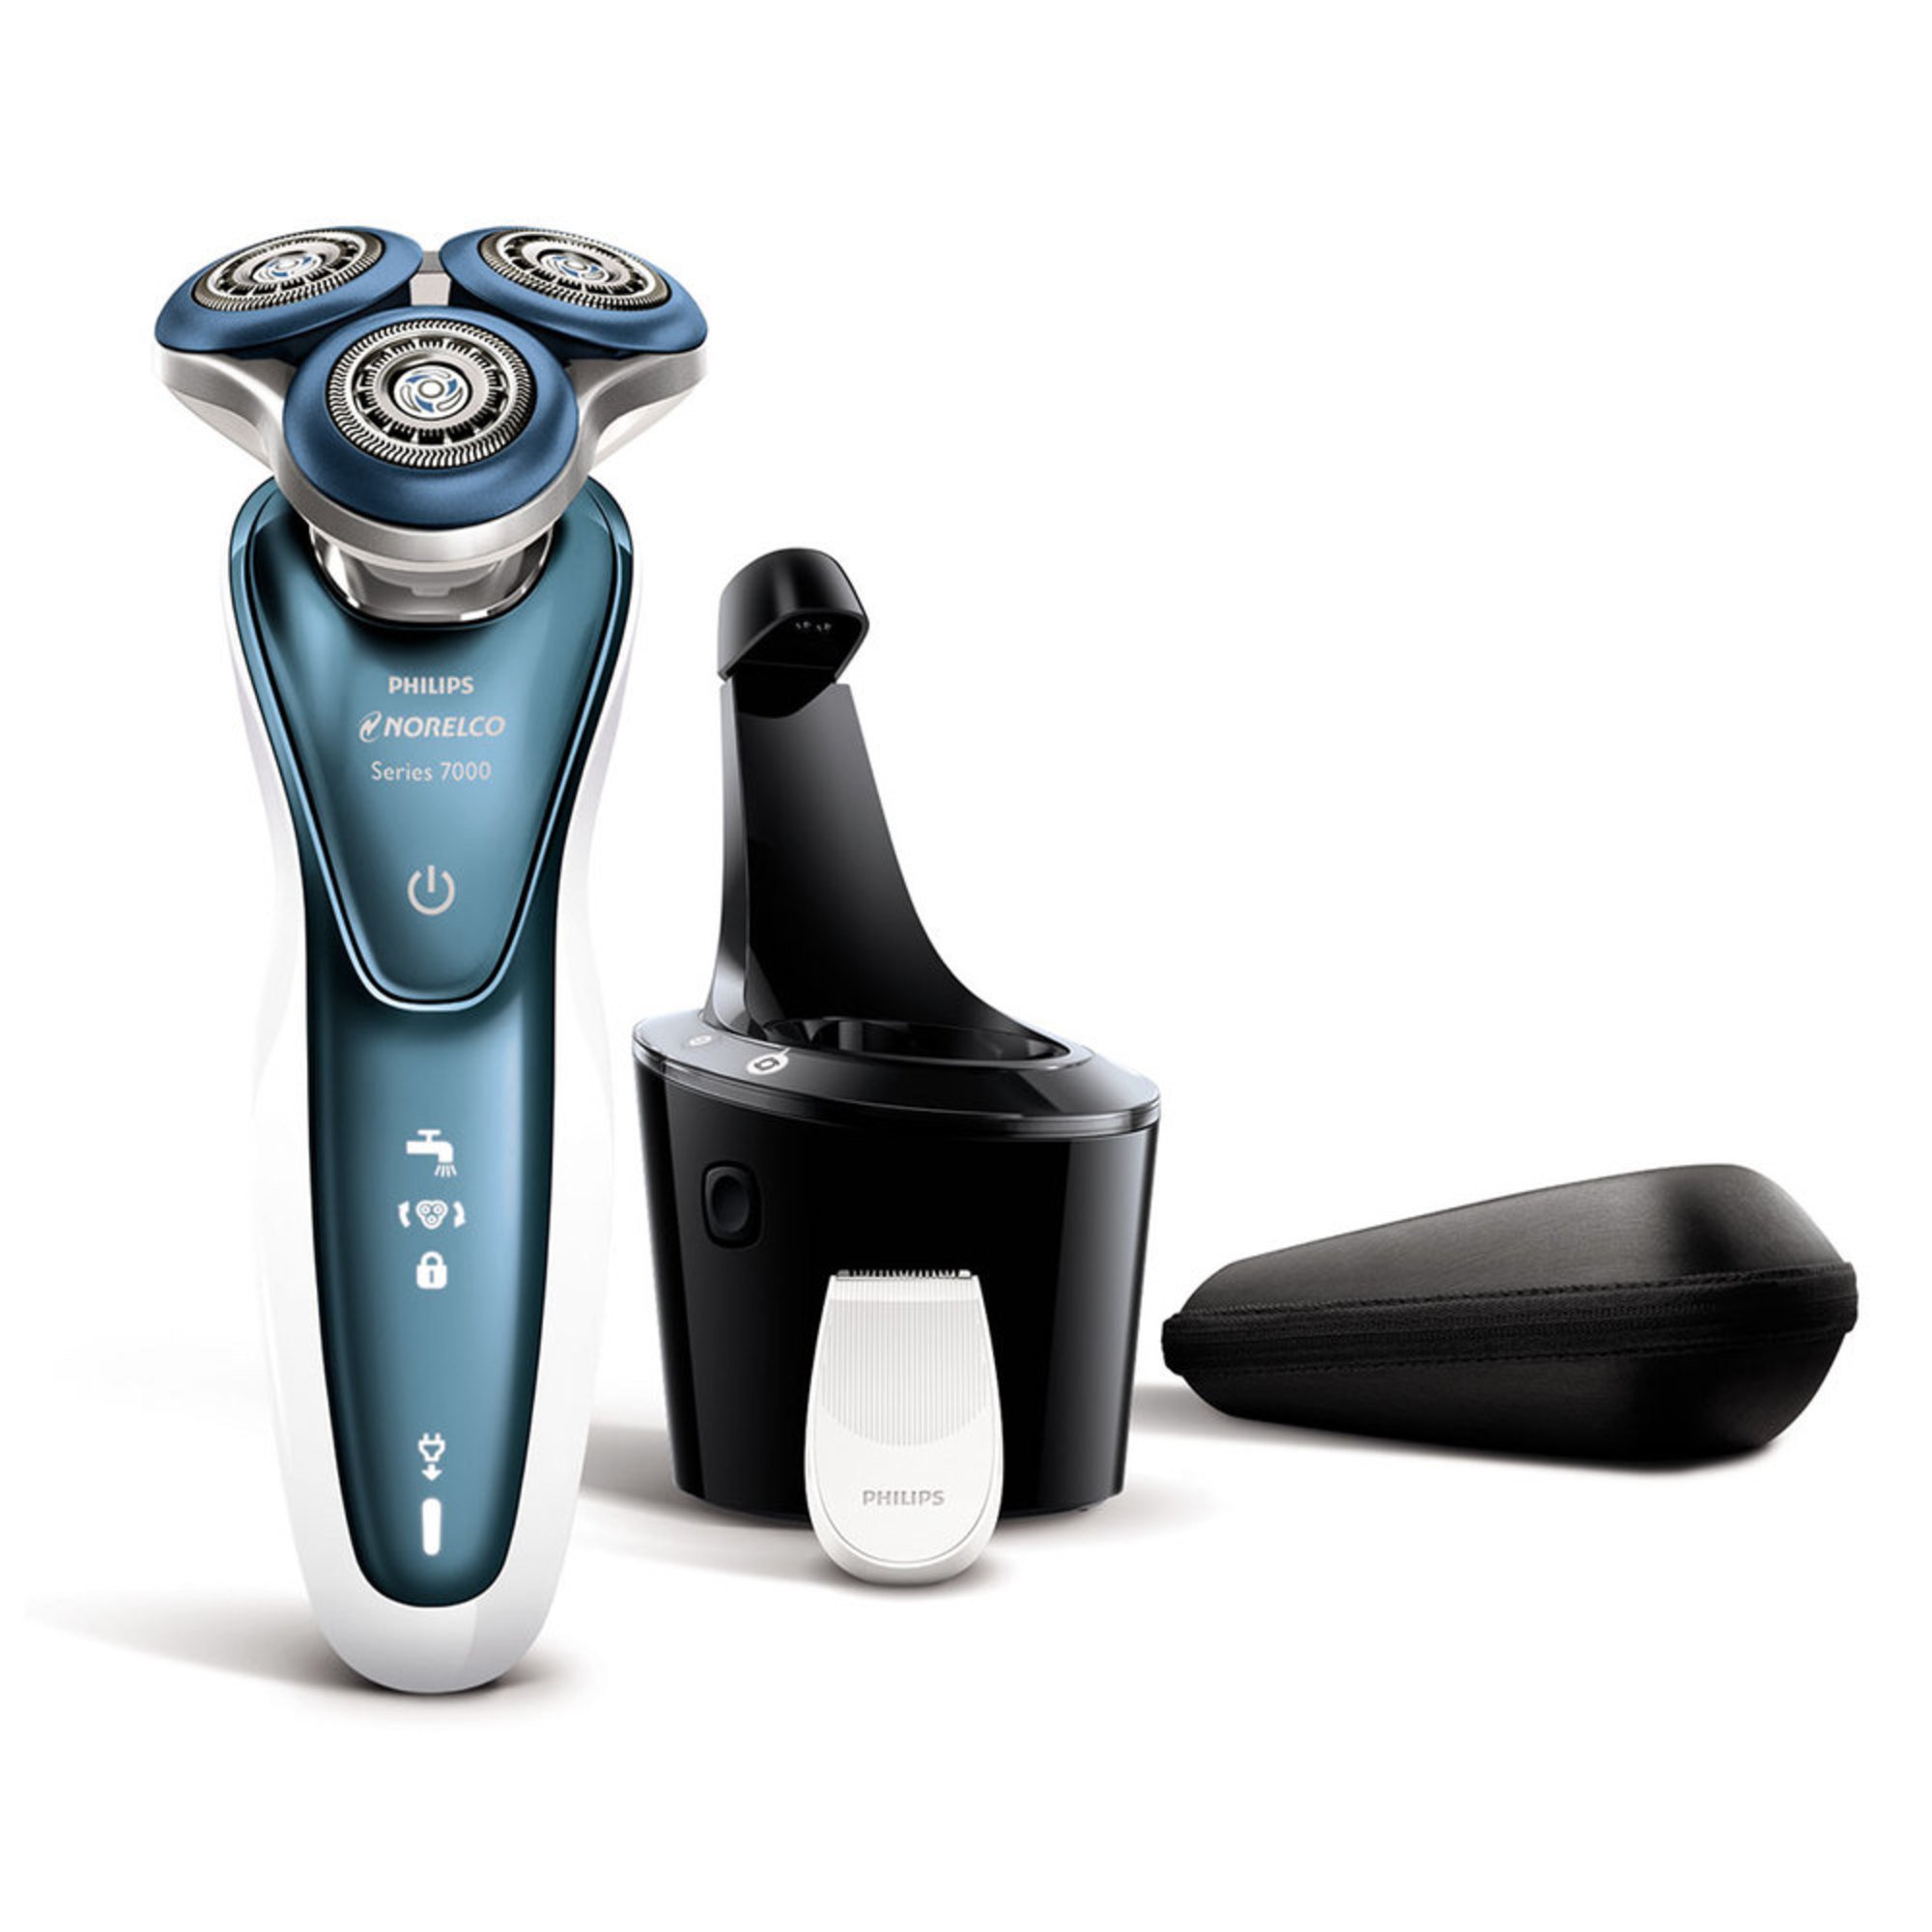 Philips Norelco Shaver 7500 West Dry Electric Shaver Series 7000 